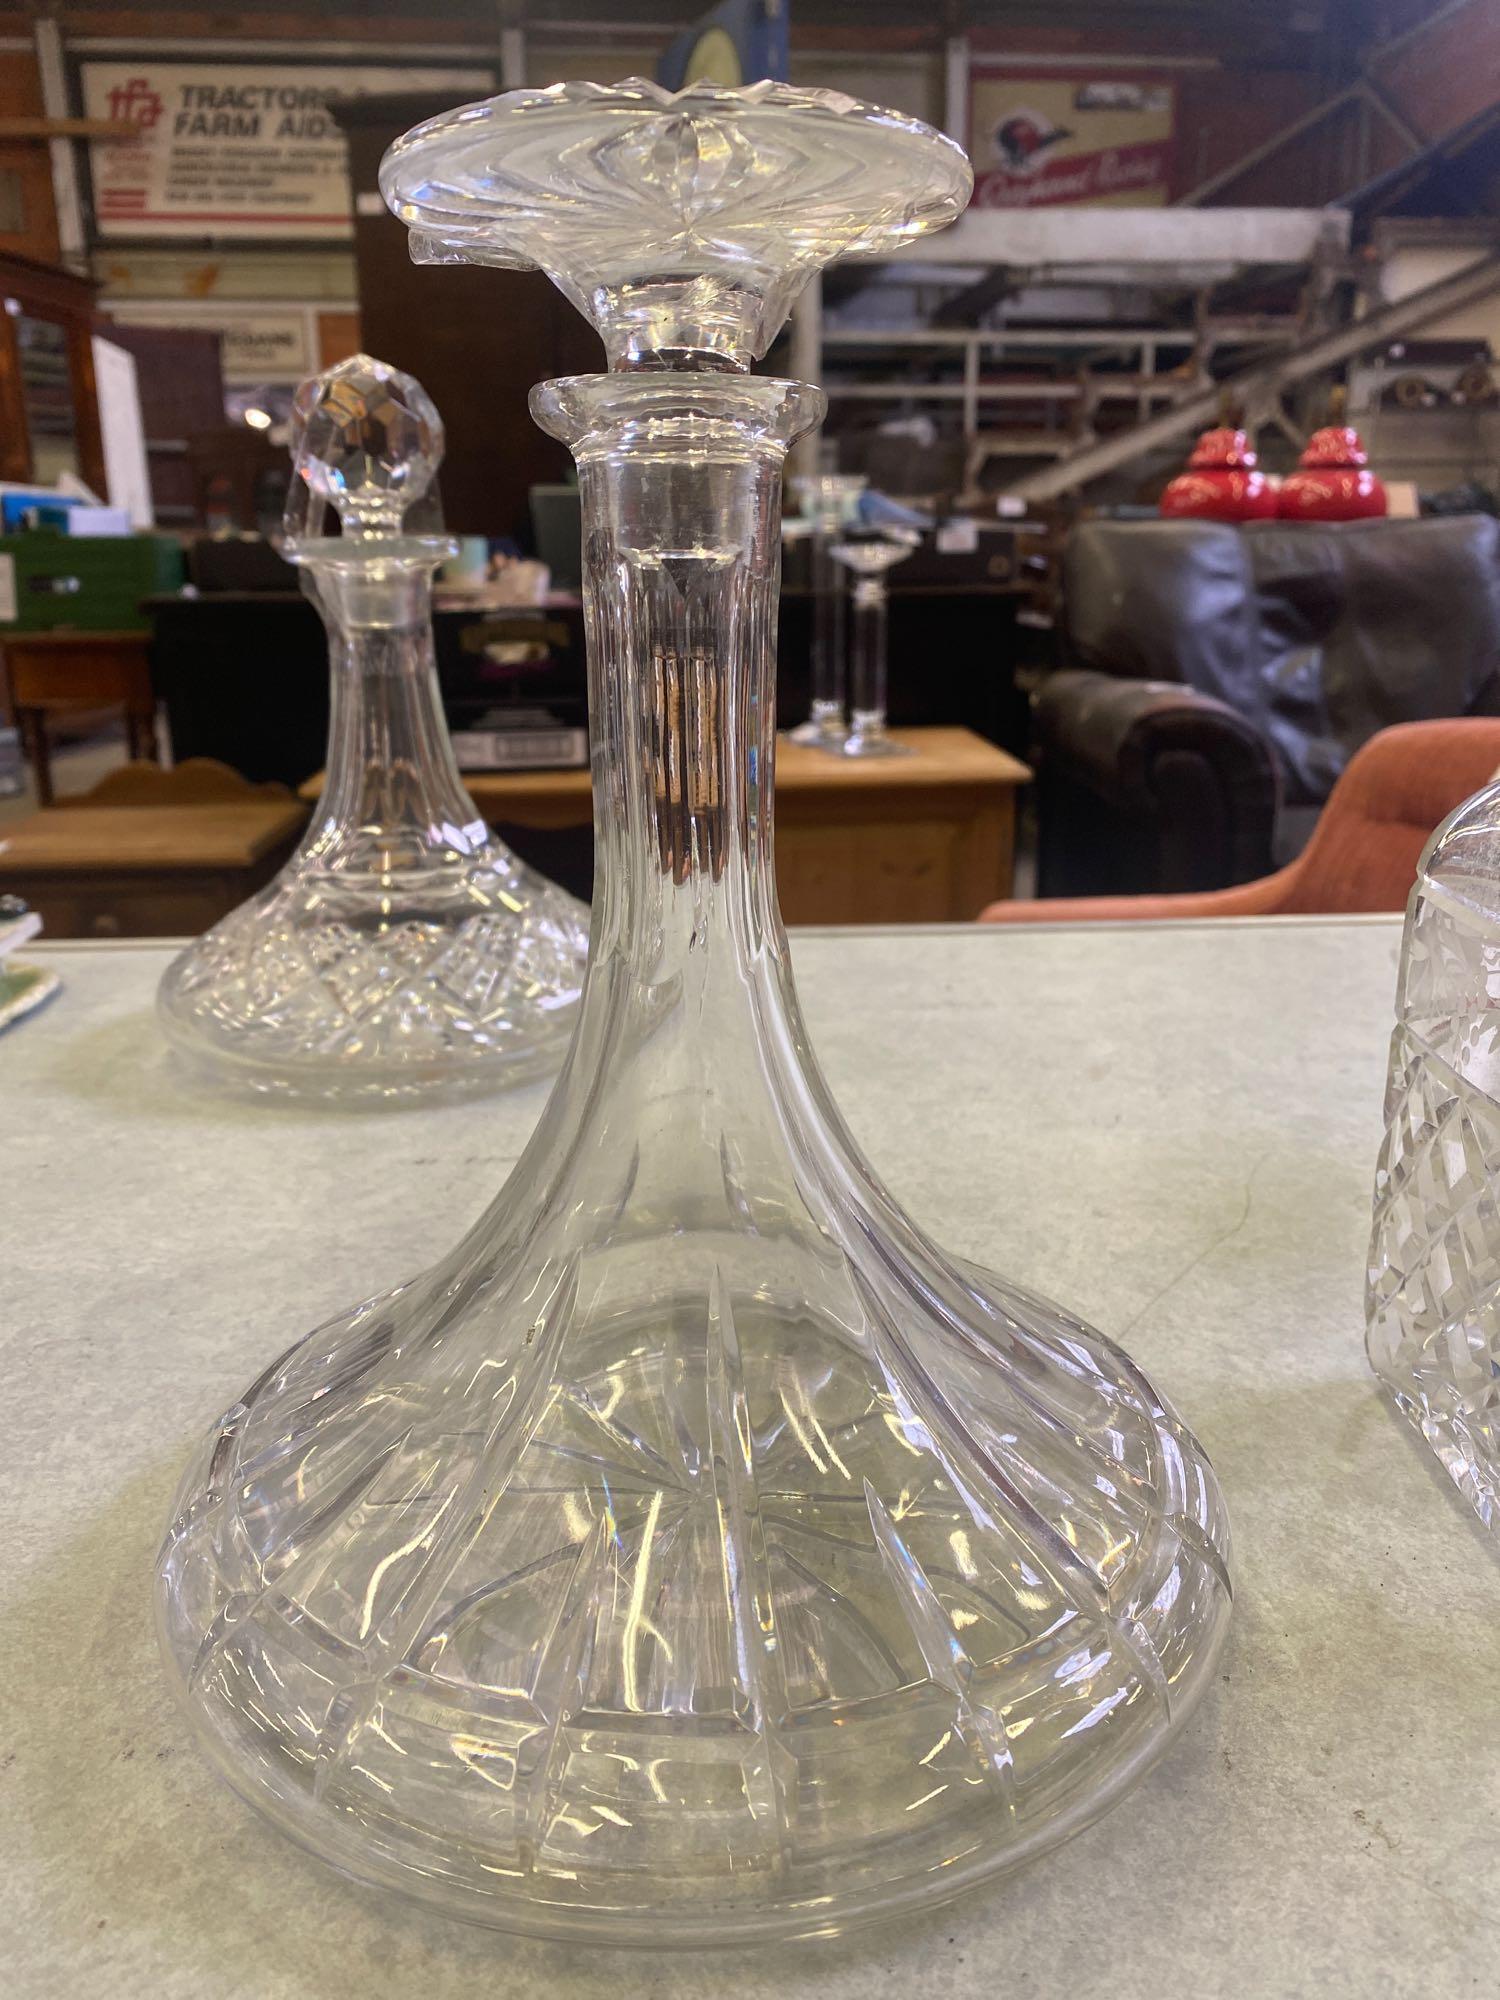 5 cut glass decanters together with a Stuart crystal glass decanter - Image 7 of 7